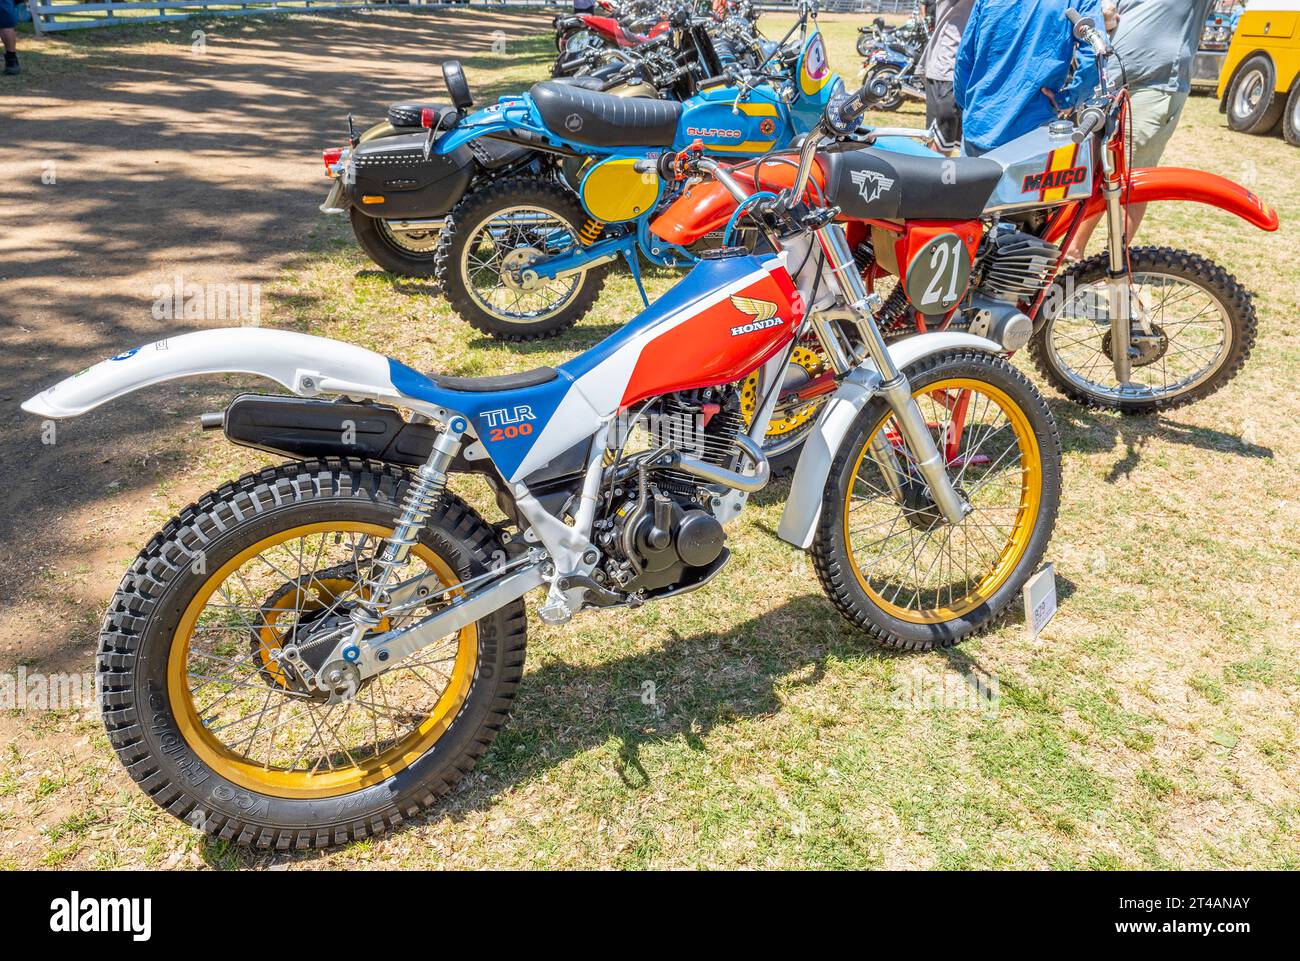 The Honda Reflex (TLR200) is a dual purpose trials motorcycle sold through 1986 to 1987, this restored bike is on show at Glen Innes, northern NSW Stock Photo